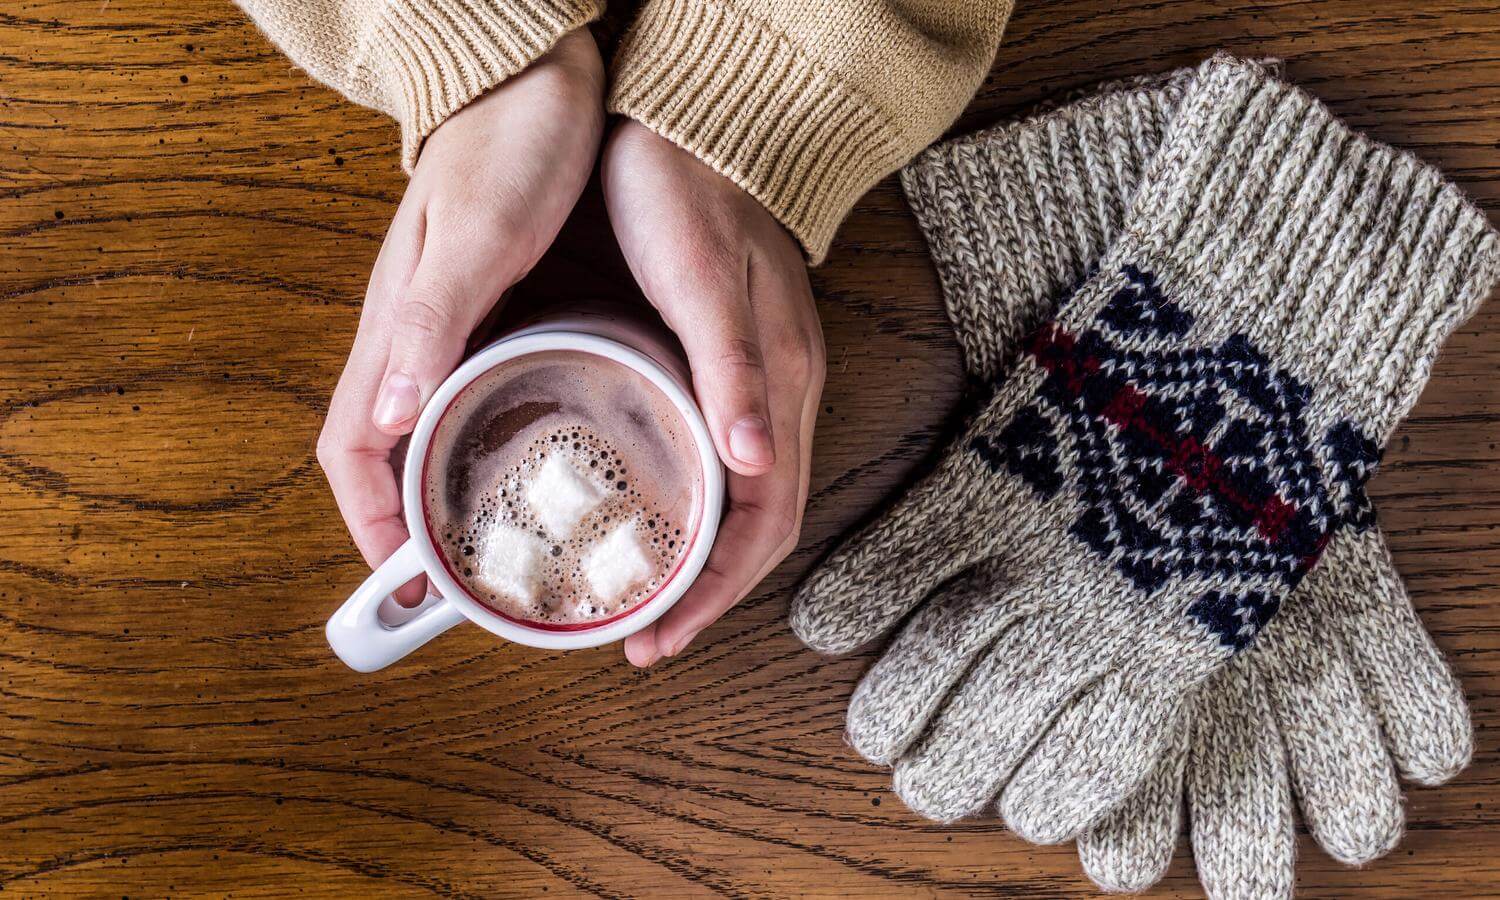 Hands holding mug of hot cocoa with marshmallows and gloves beside